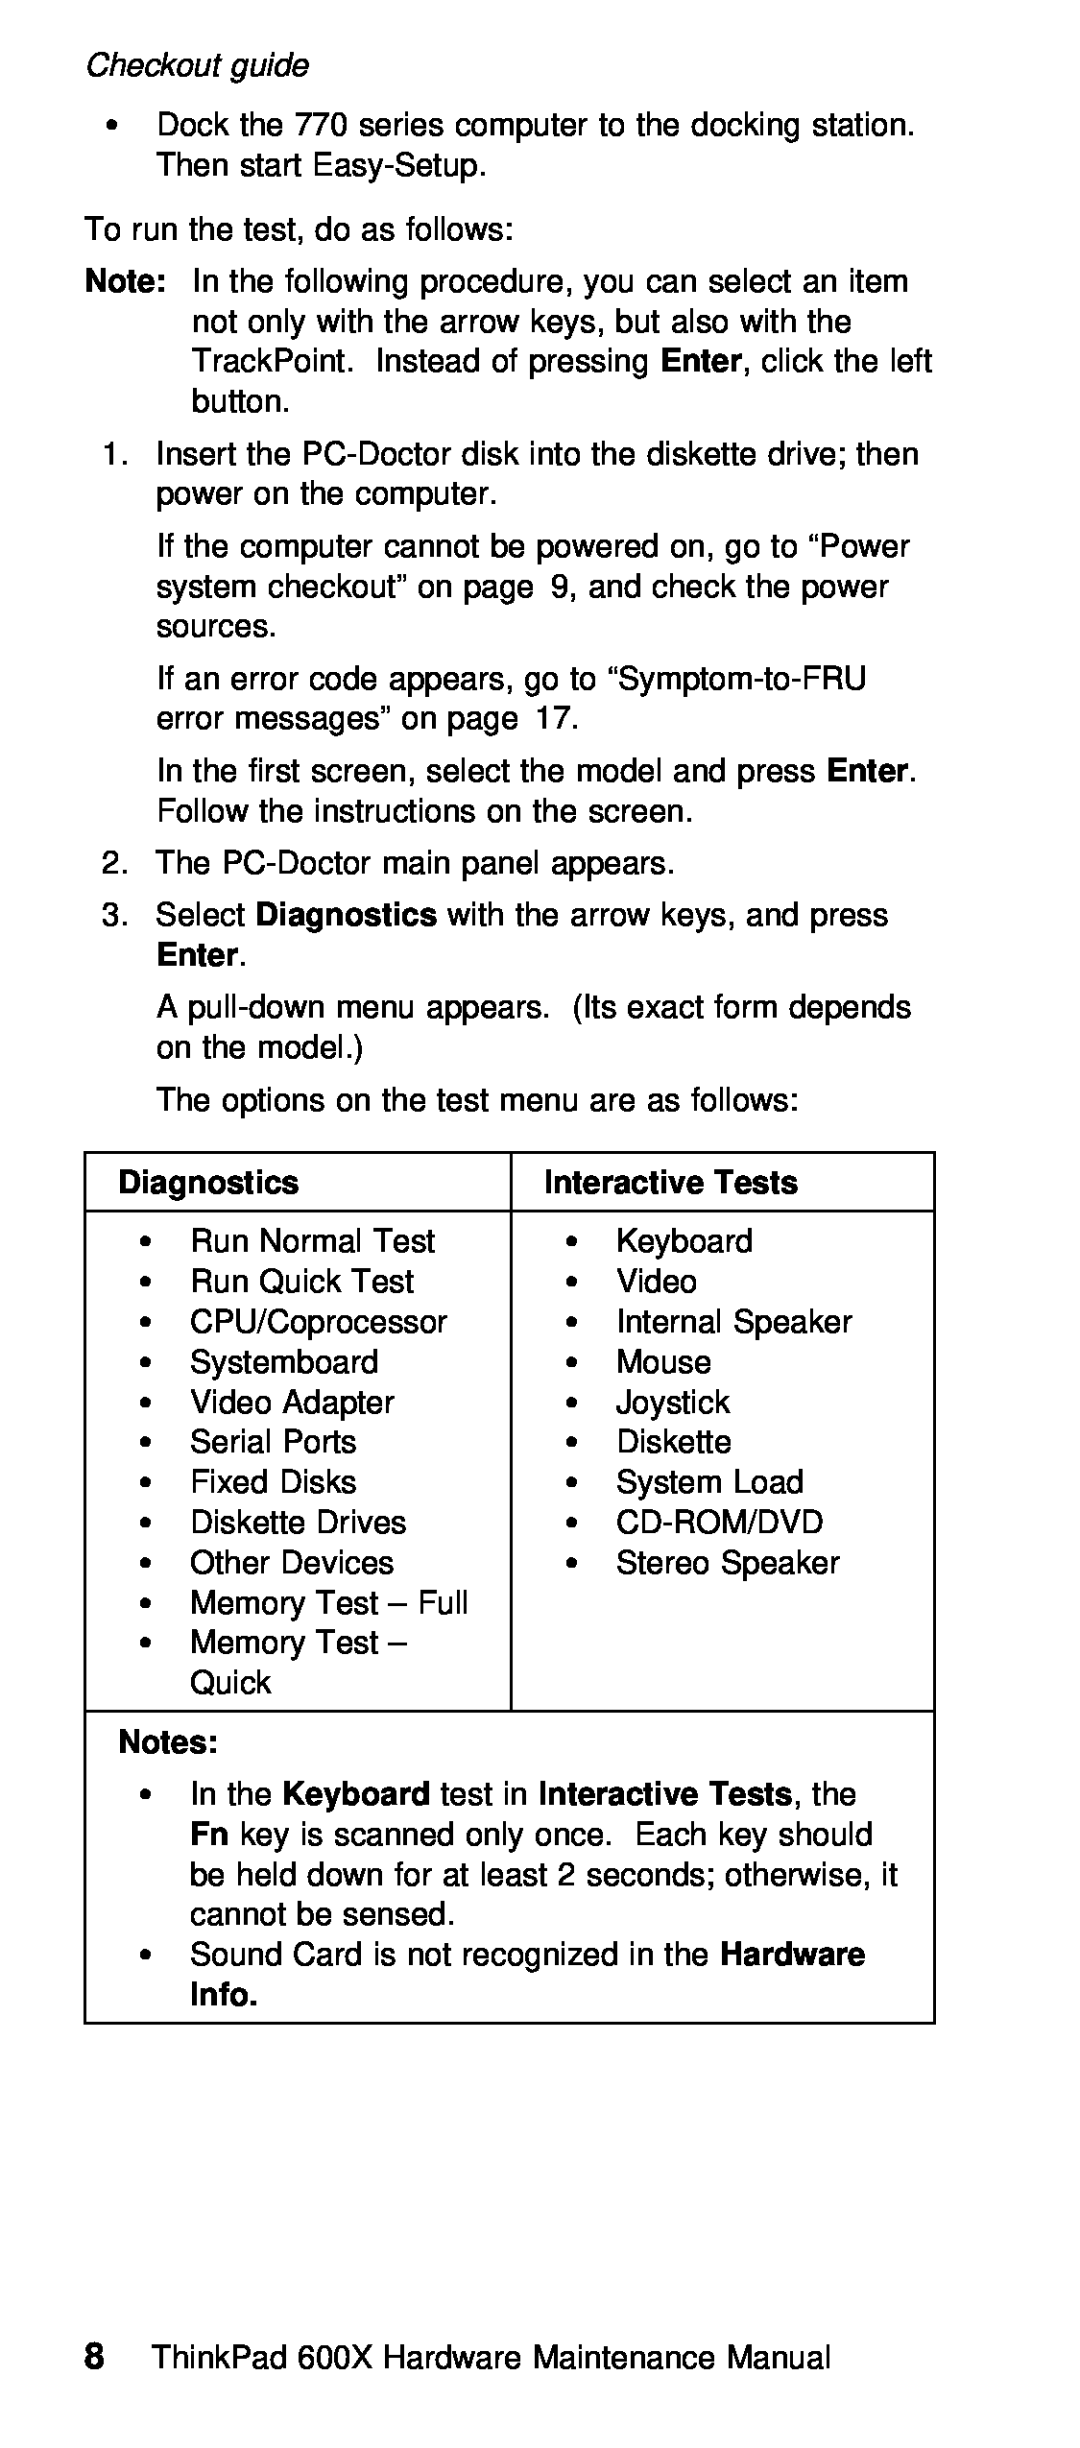 IBM 600X (MT 2646) manual guide, Ÿ Dock, series computer to the docking s, Then, start, Easy-Setup, Interactive Tests, Info 